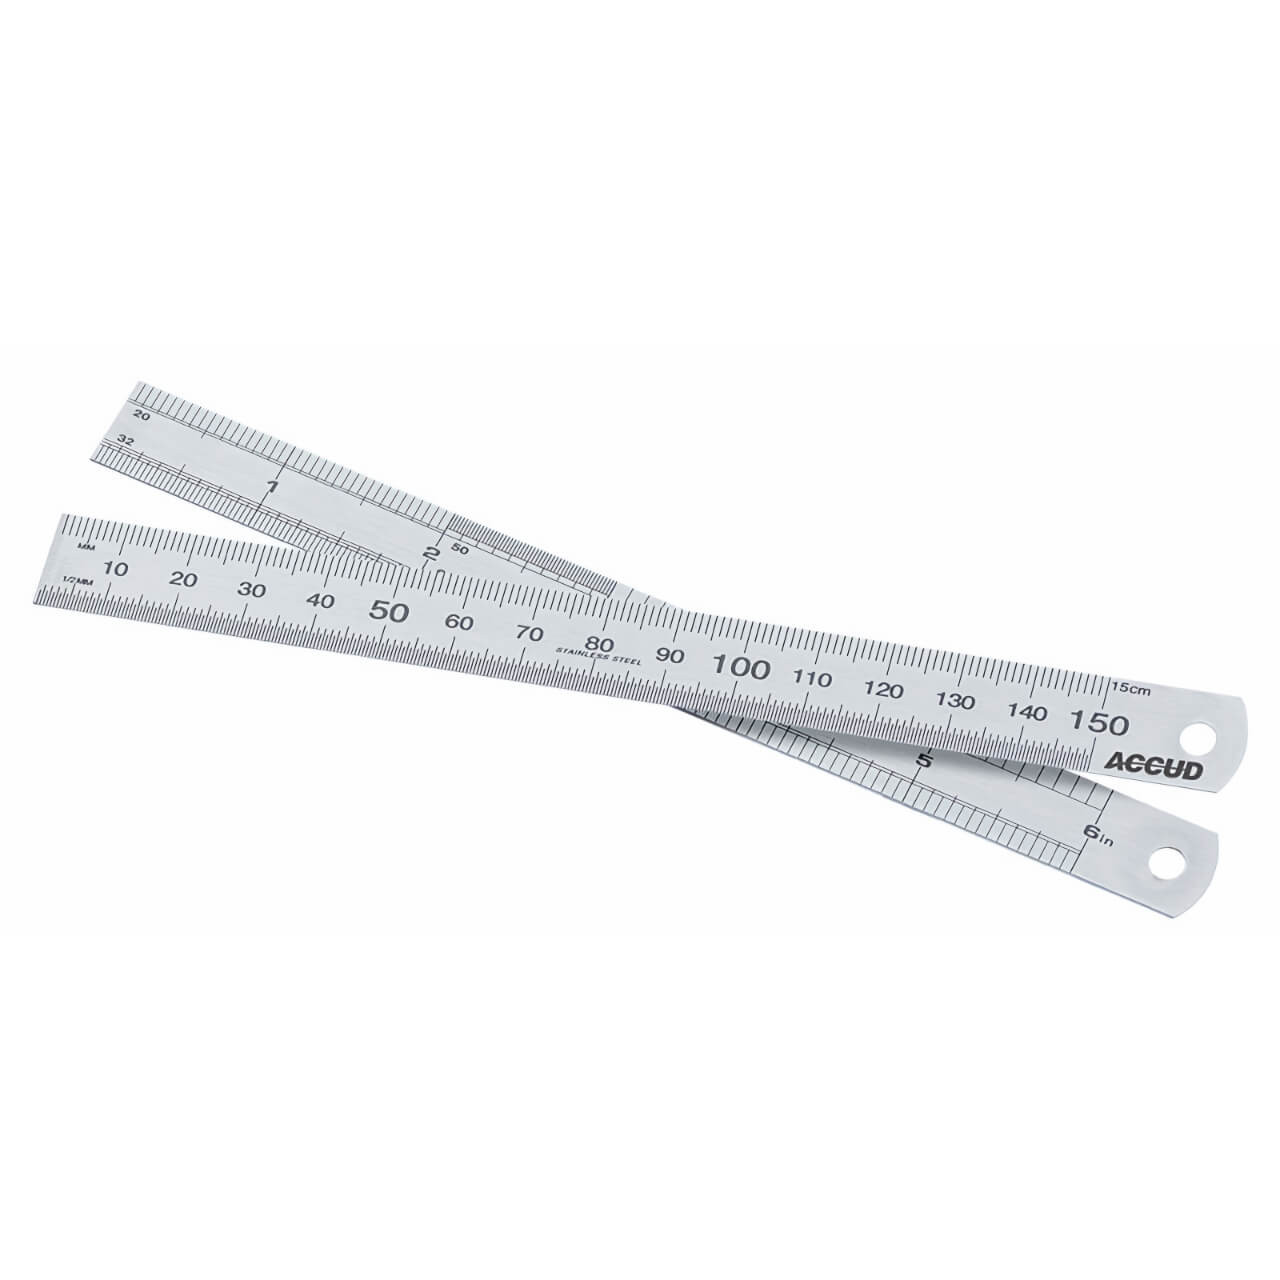 Accud 150mm Stainless Ruler